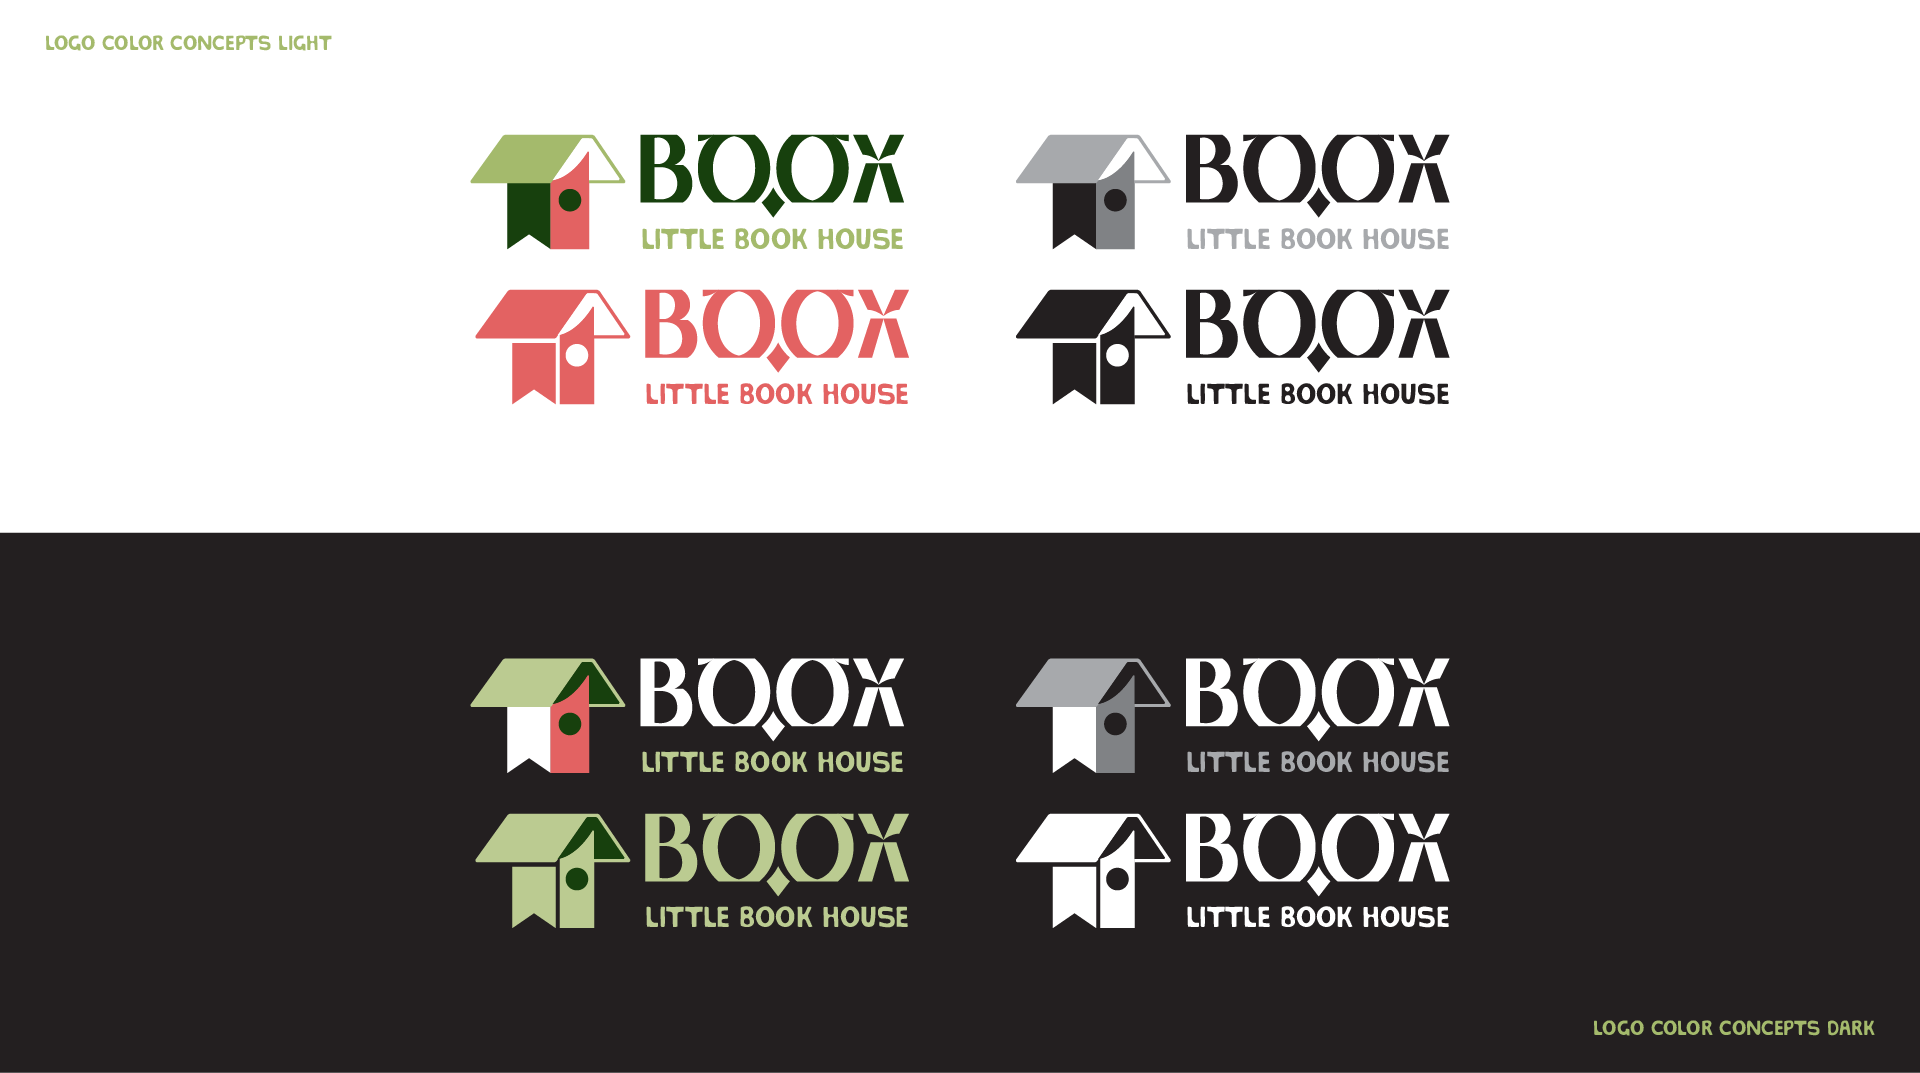 Logo concepts with color variations on light and dark backgrounds.